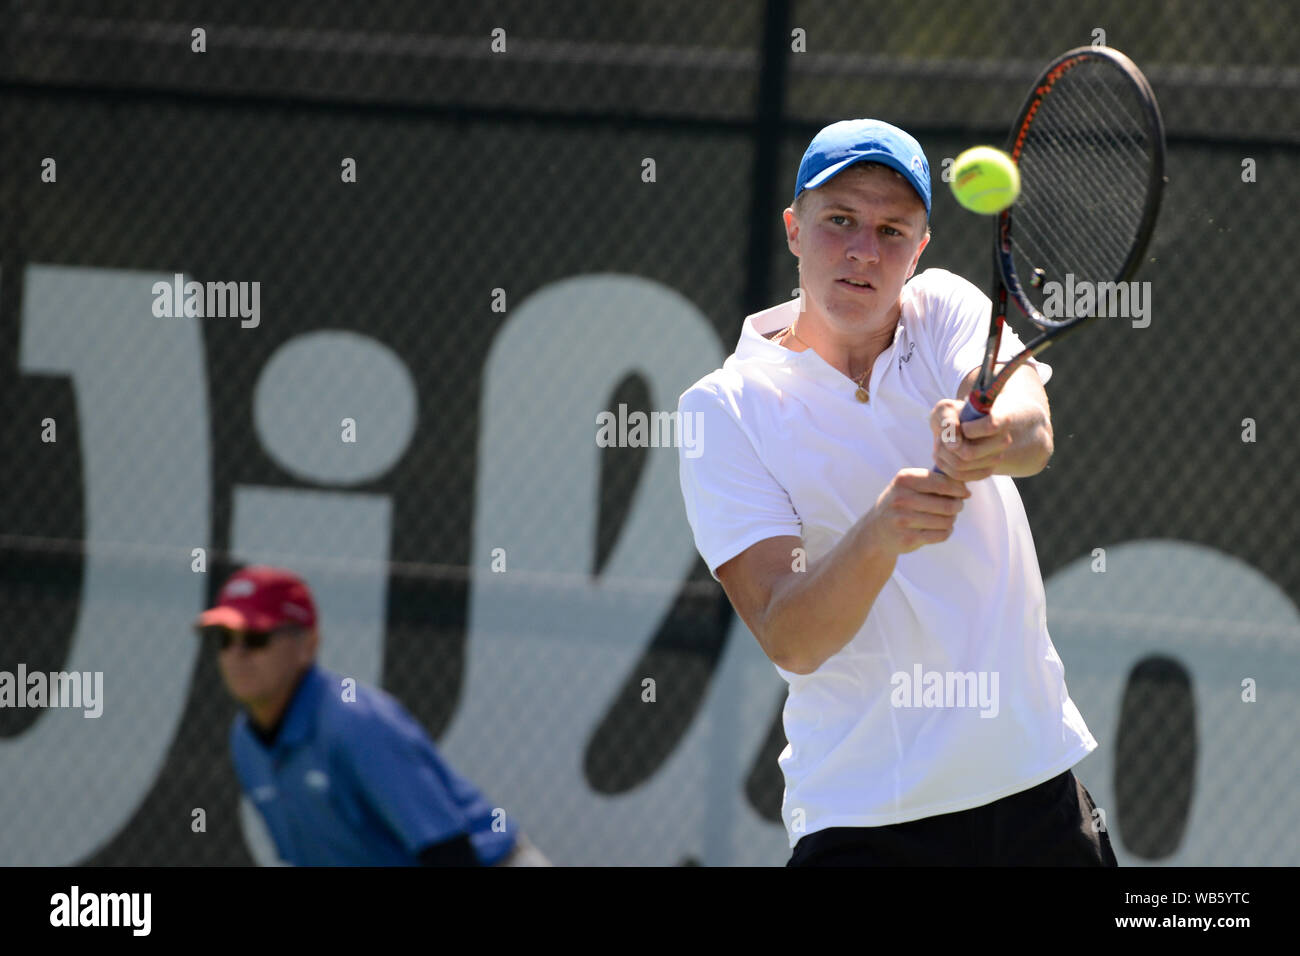 College Park, Maryland, USA. 24th Aug, 2019. Karlis Ozolins of Latvia in  action in the final of the Wayne K. Curry Prince George's County  International Junior Tennis Championships in College Park Maryland.